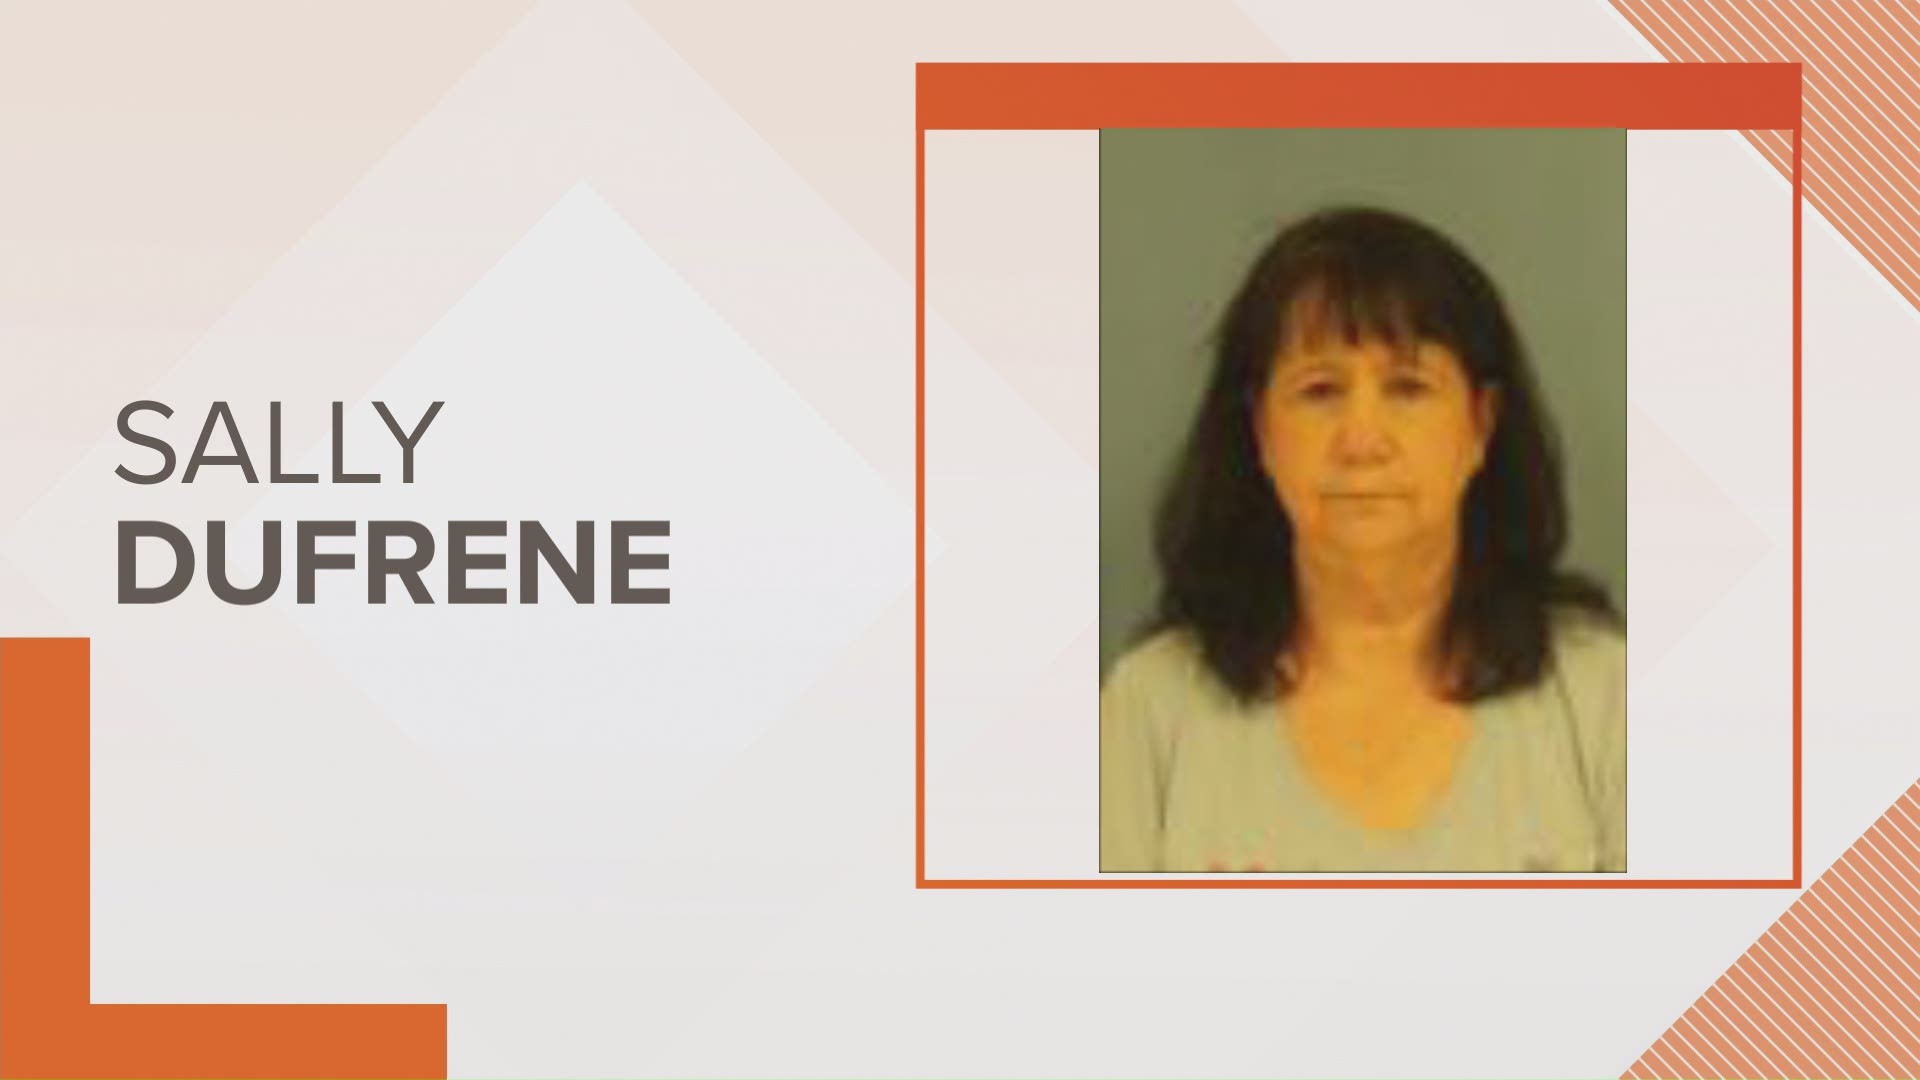 Marie Sally Dufrene was taken into custody and charged with obstruction of justice.